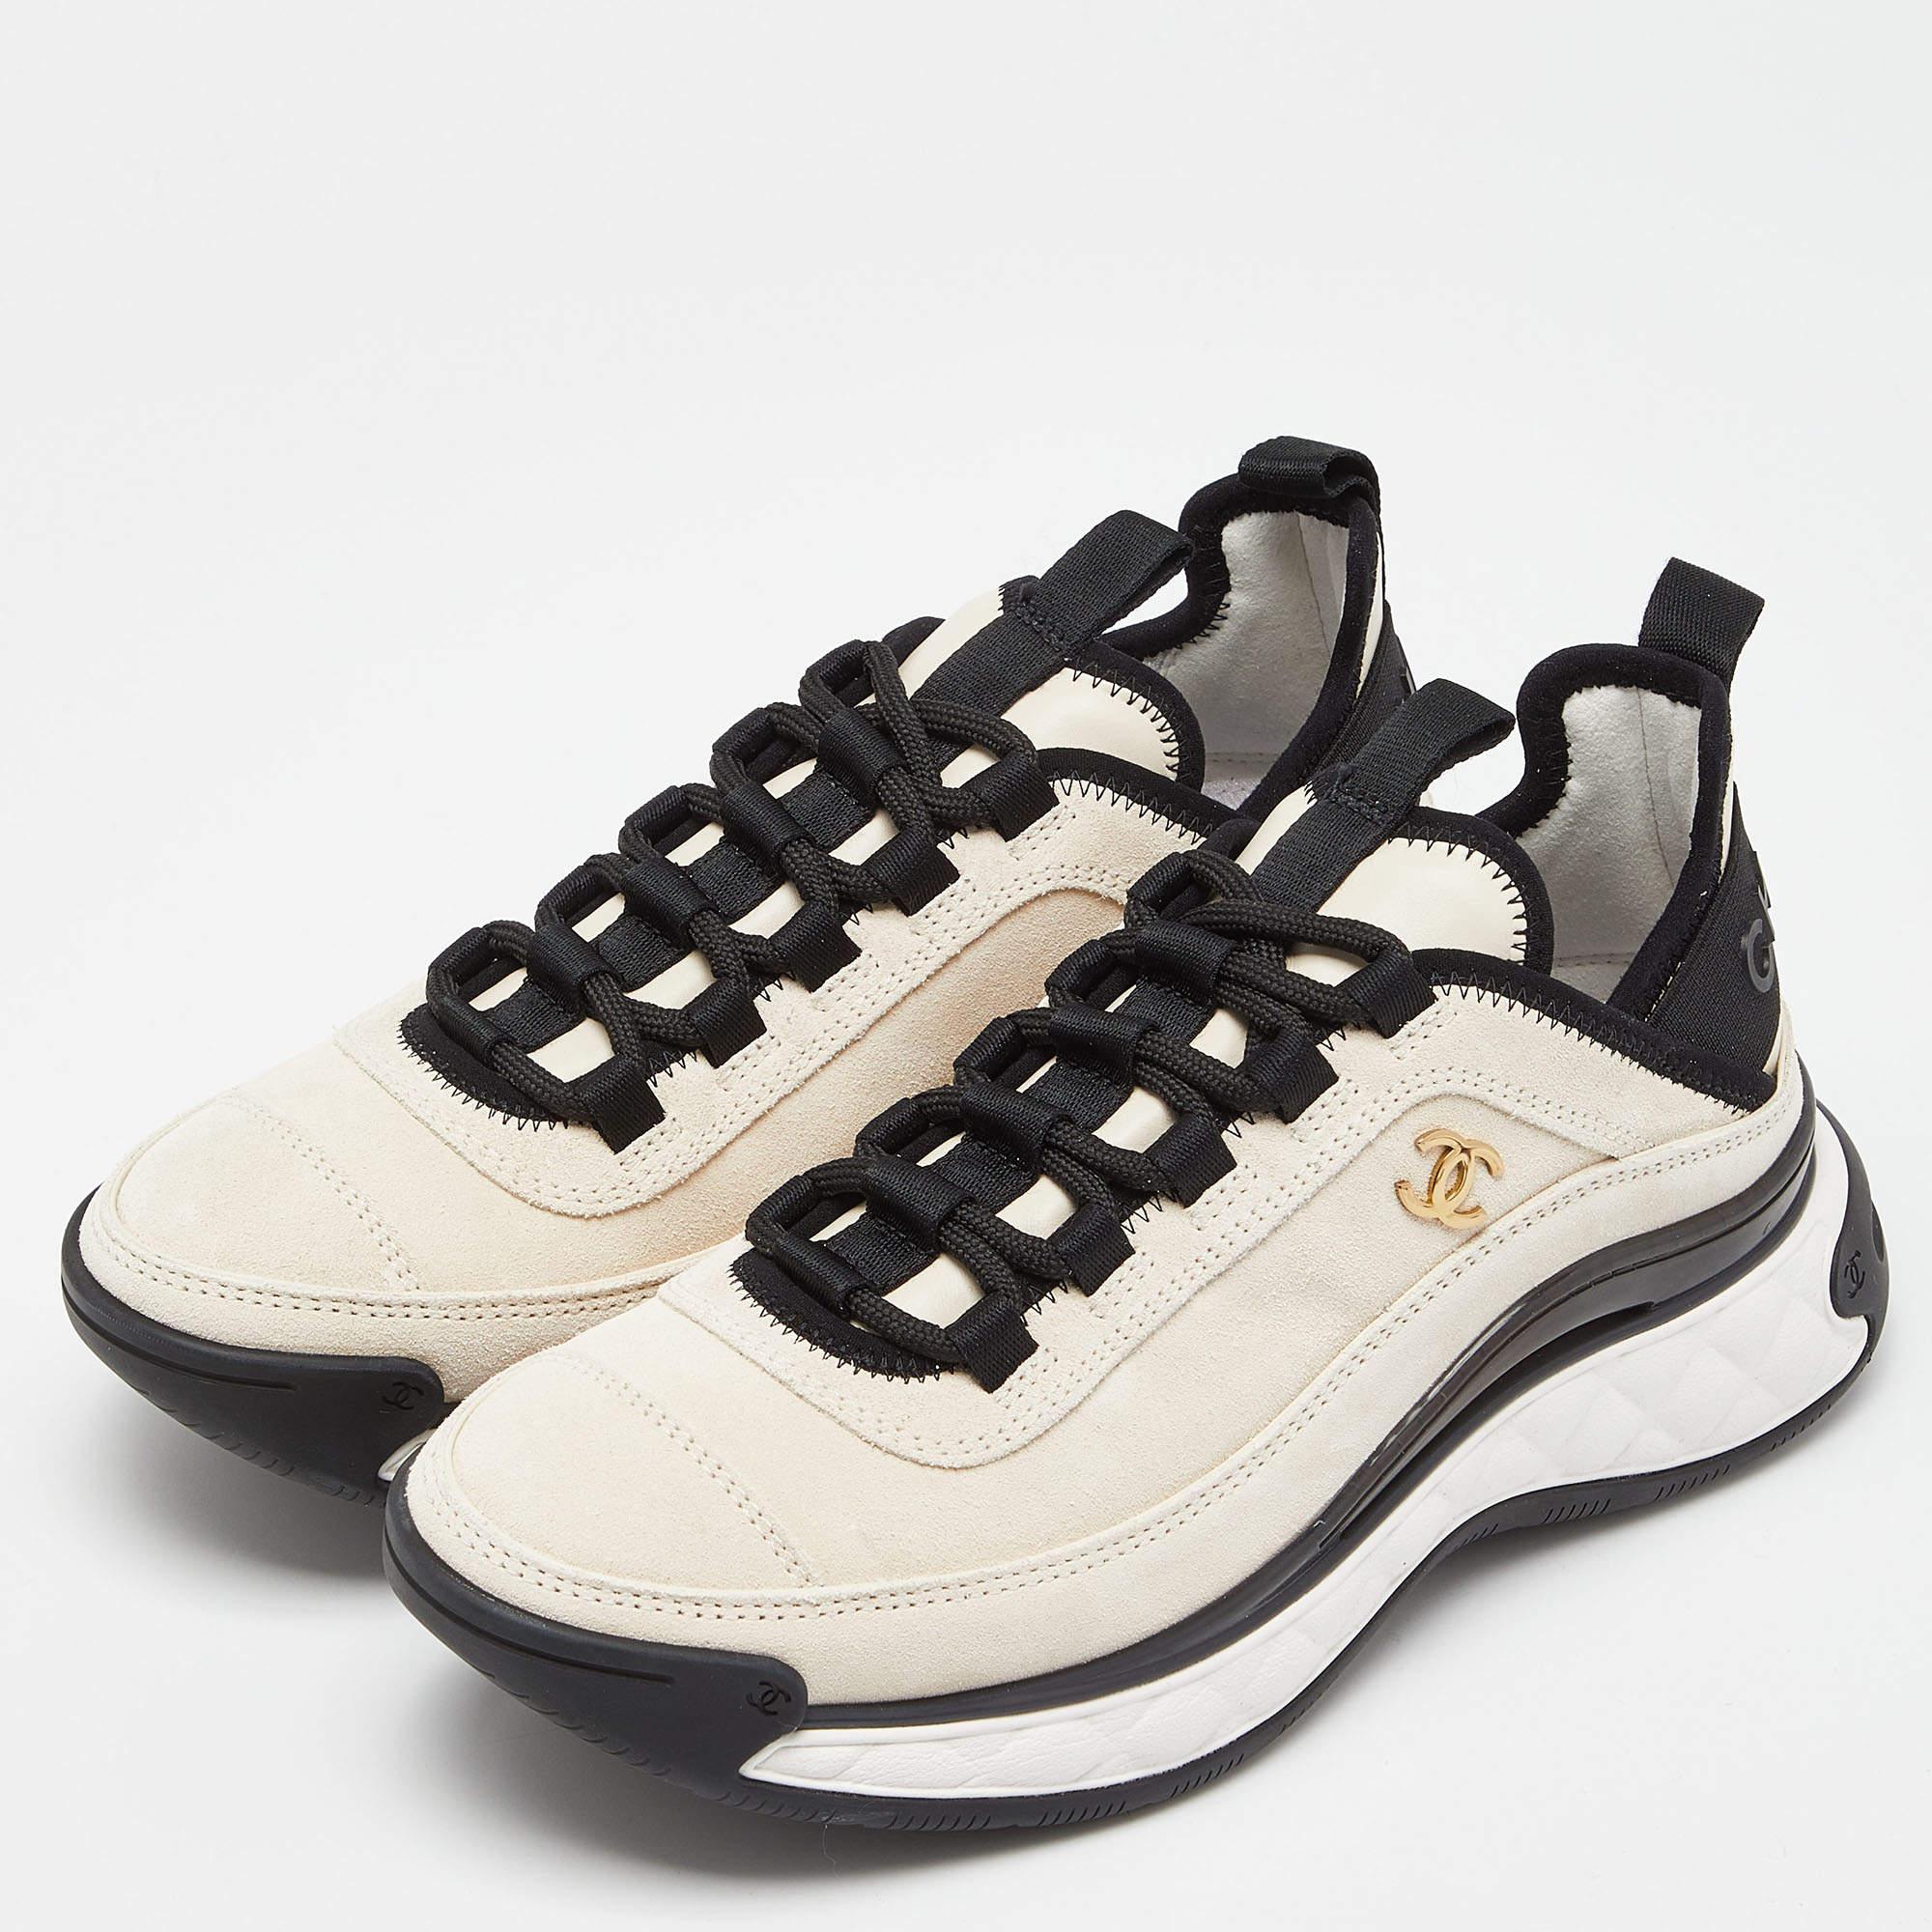 Designed into a chunky size, these Chanel sneakers are not just stylish in appeal but also comfortable to wear. Crafted from quality materials, they are designed with CC logos on the sides. Finished off with laces on the vamps, these kicks still top